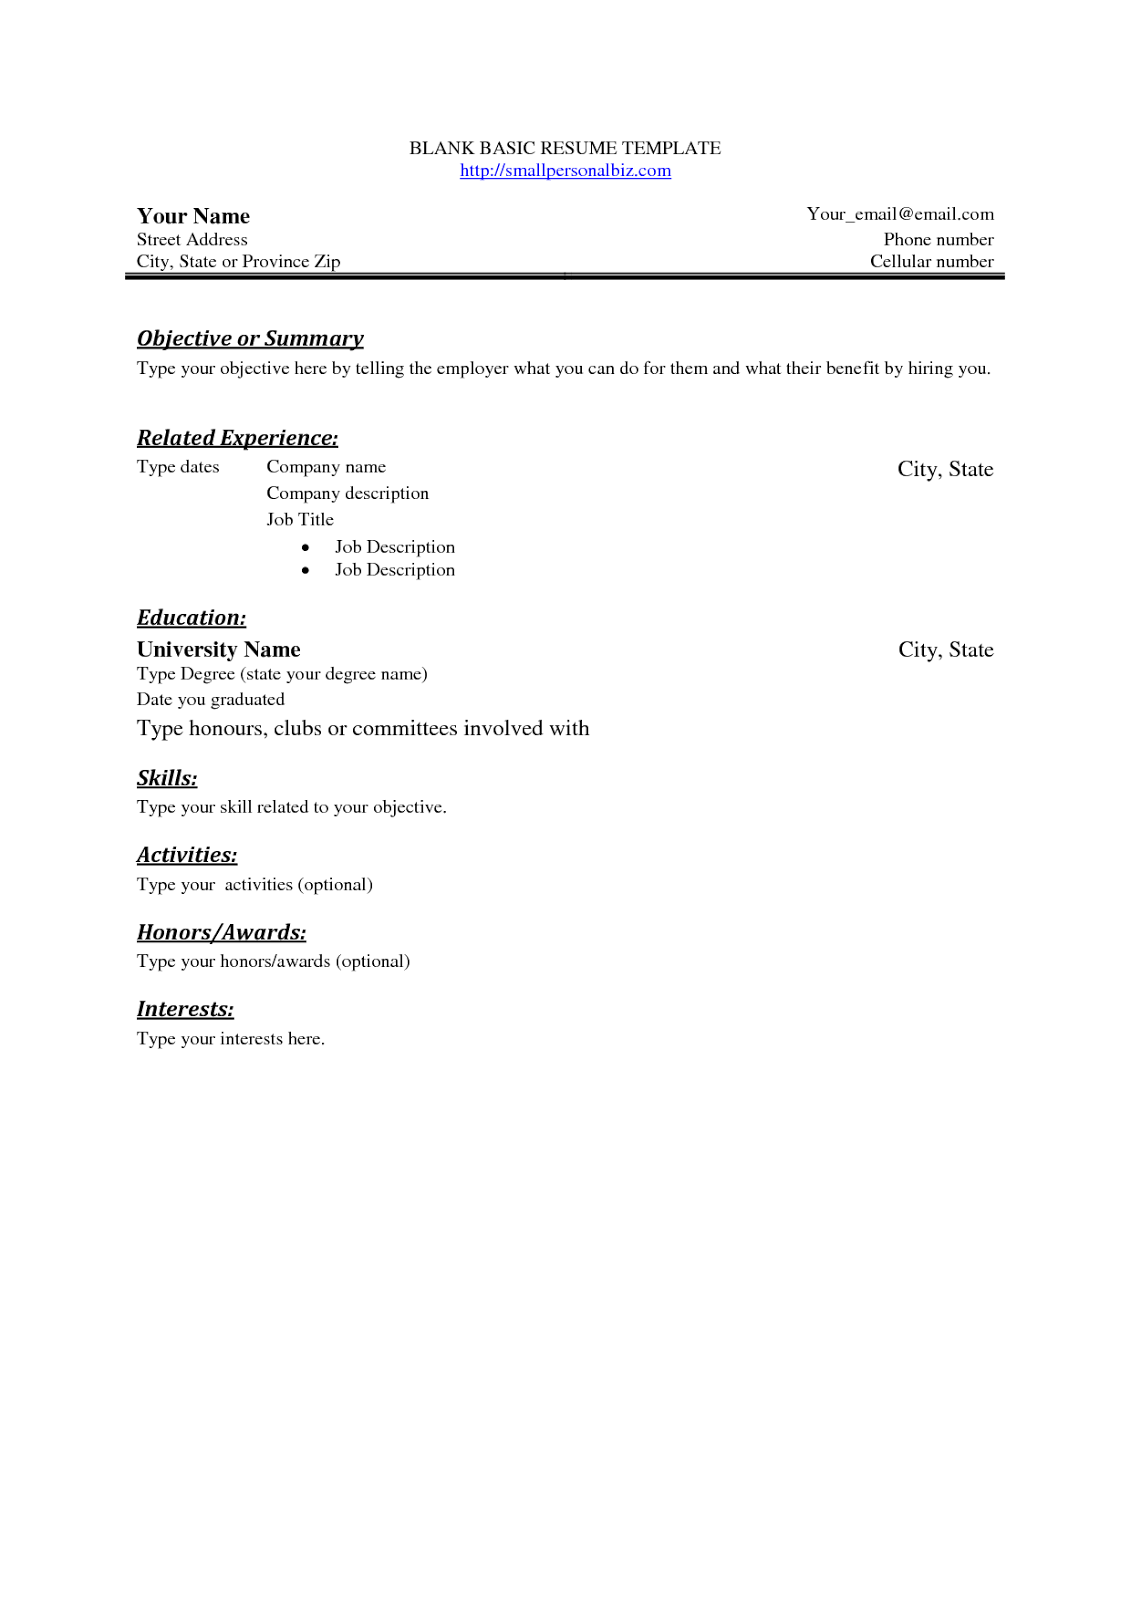 Filll in the blank resume